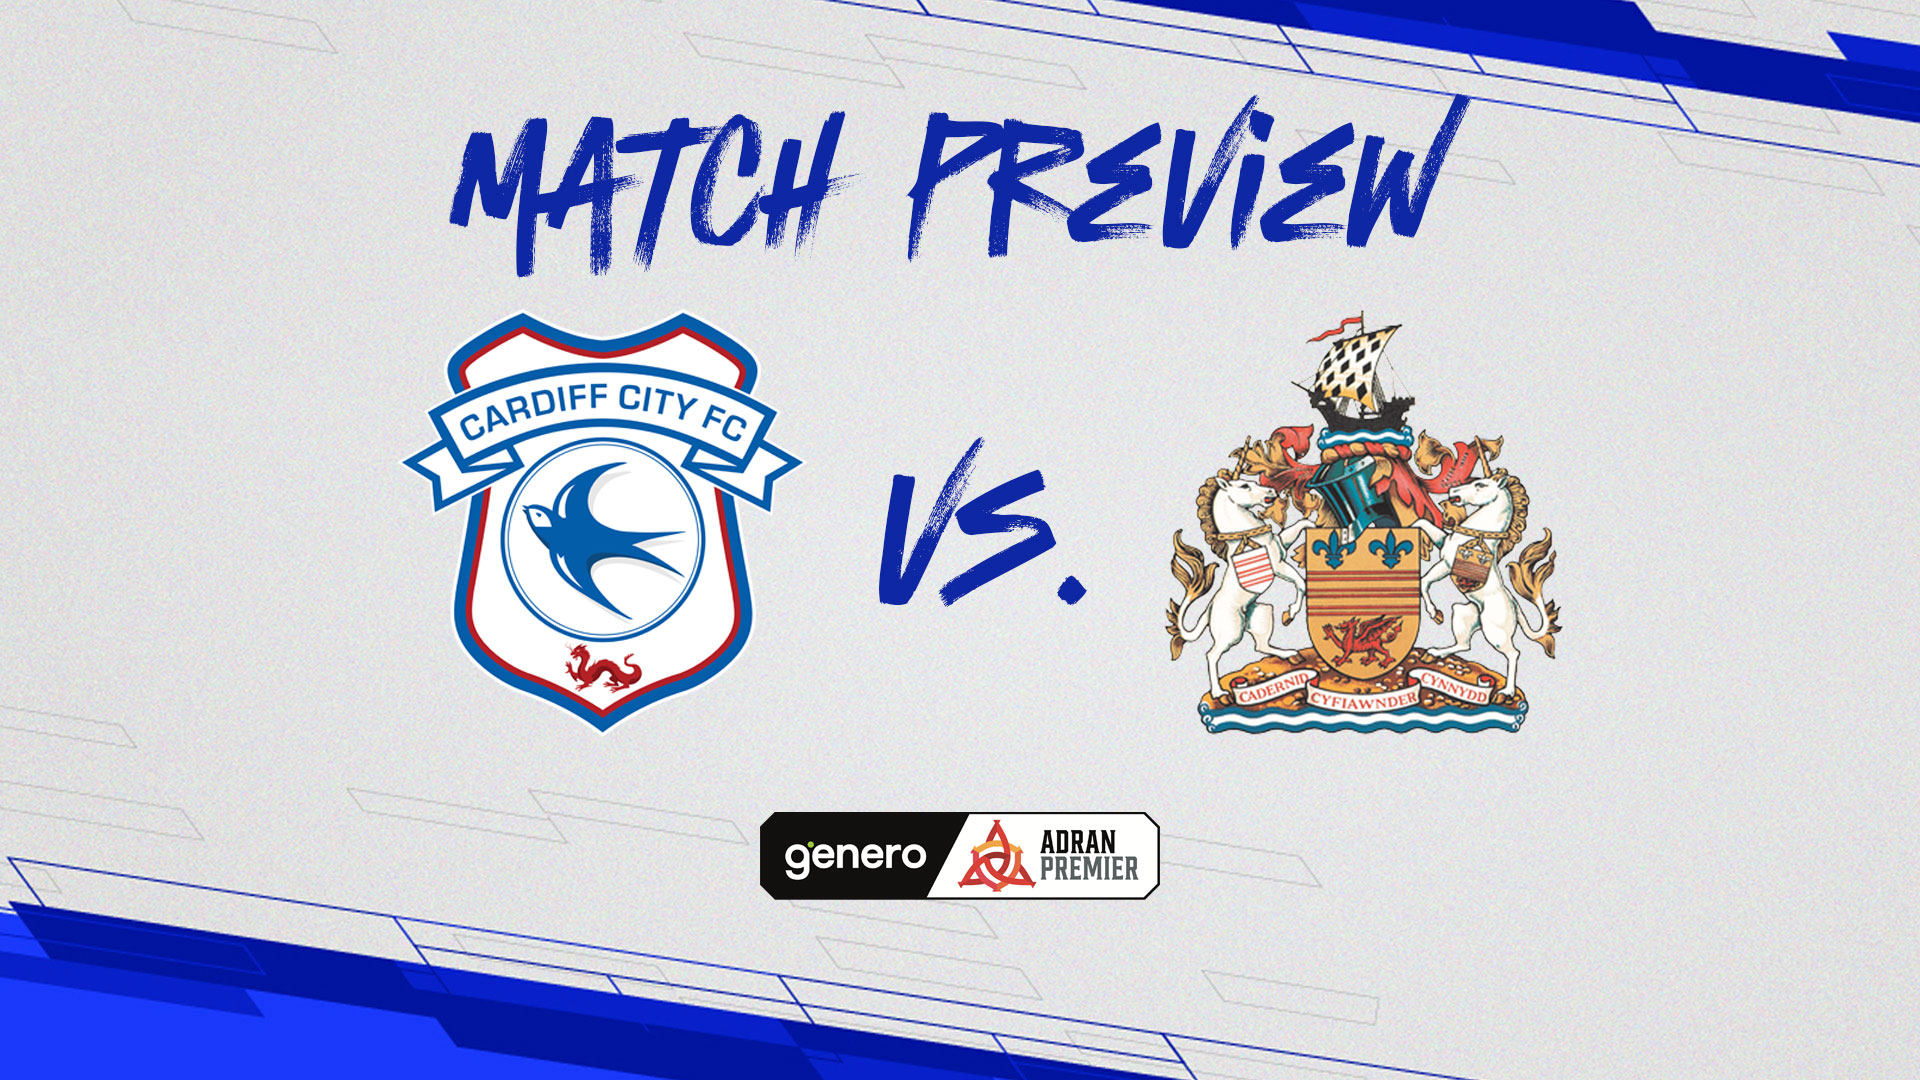 Match Preview: Cardiff City Women vs. Barry Town United